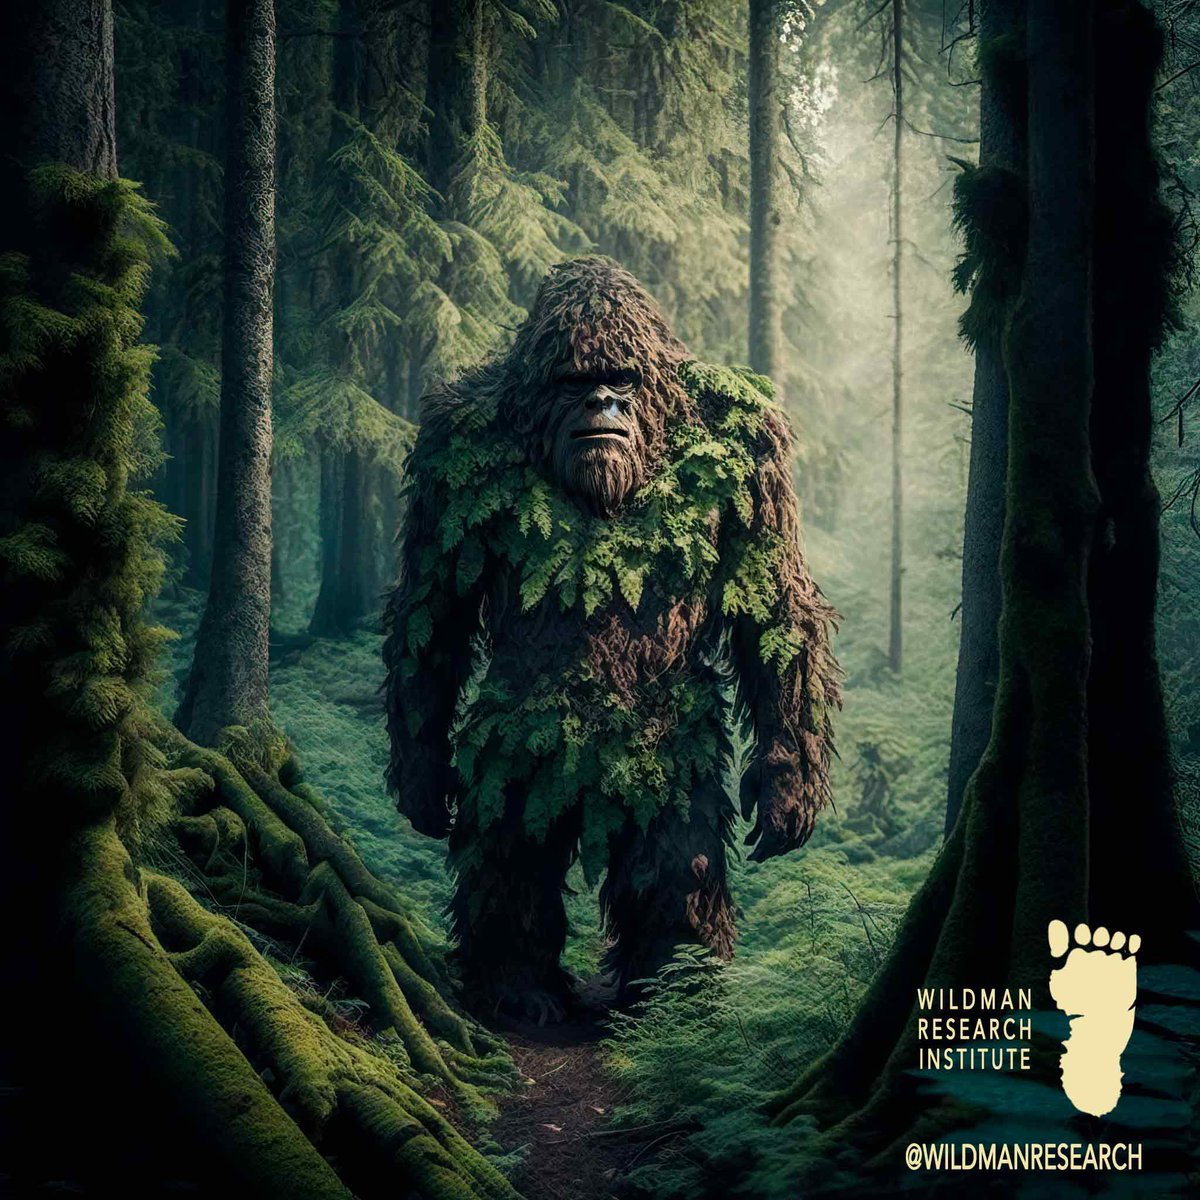 Bigfoot camouflage 🍃🦶🏿:
Could sightings of Bigfoot with hair covered in moss or vegetation explain the legends of them turning invisible? …(➡️). #BigfootSightings #Cryptozoology #Mythology